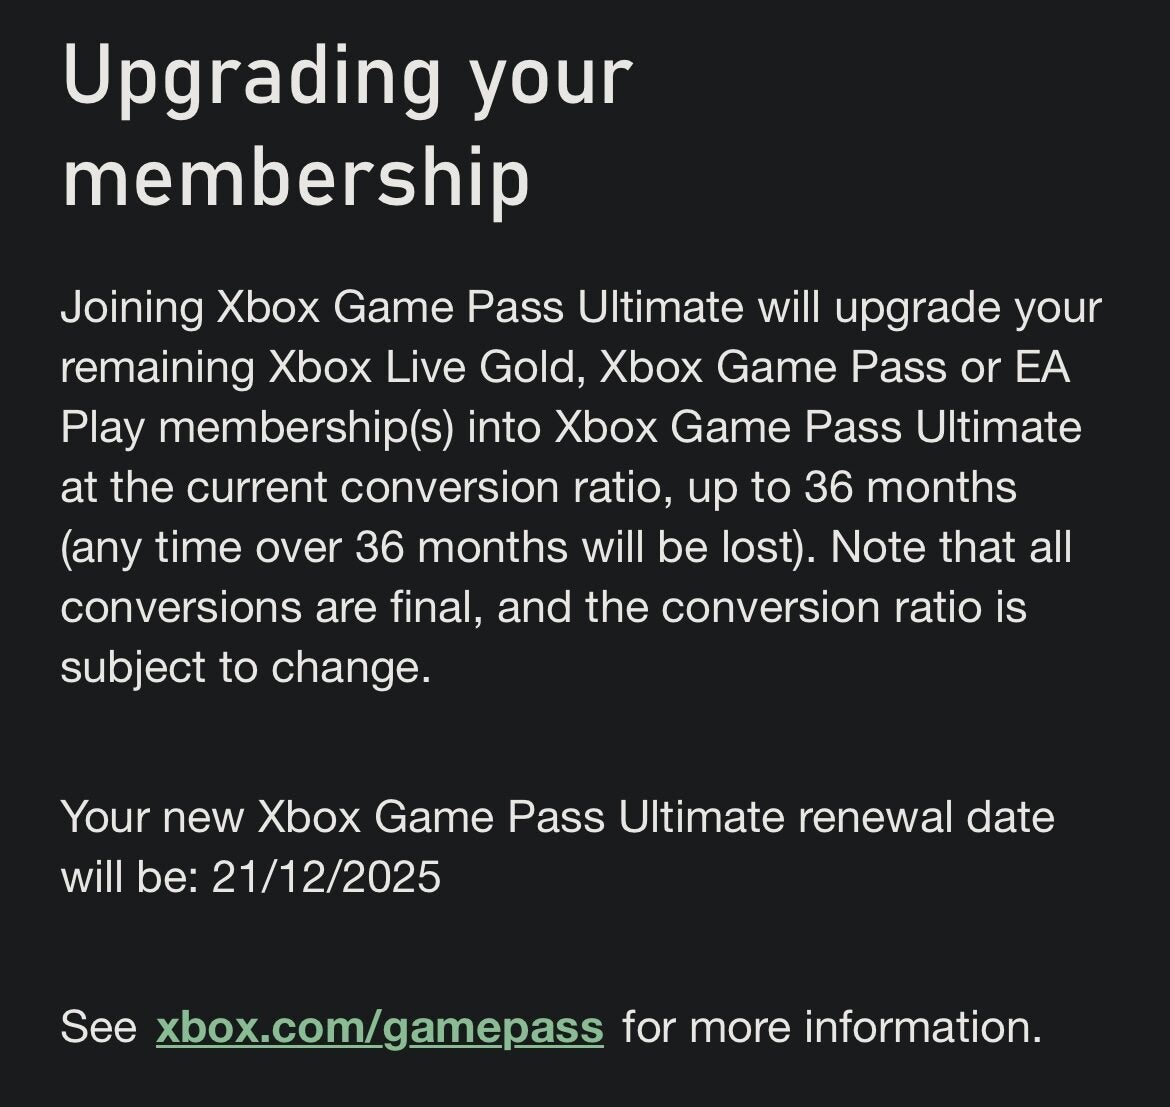 Xbox Game Pass Ultimate 3 Month ( Turkey VPN ) Buy